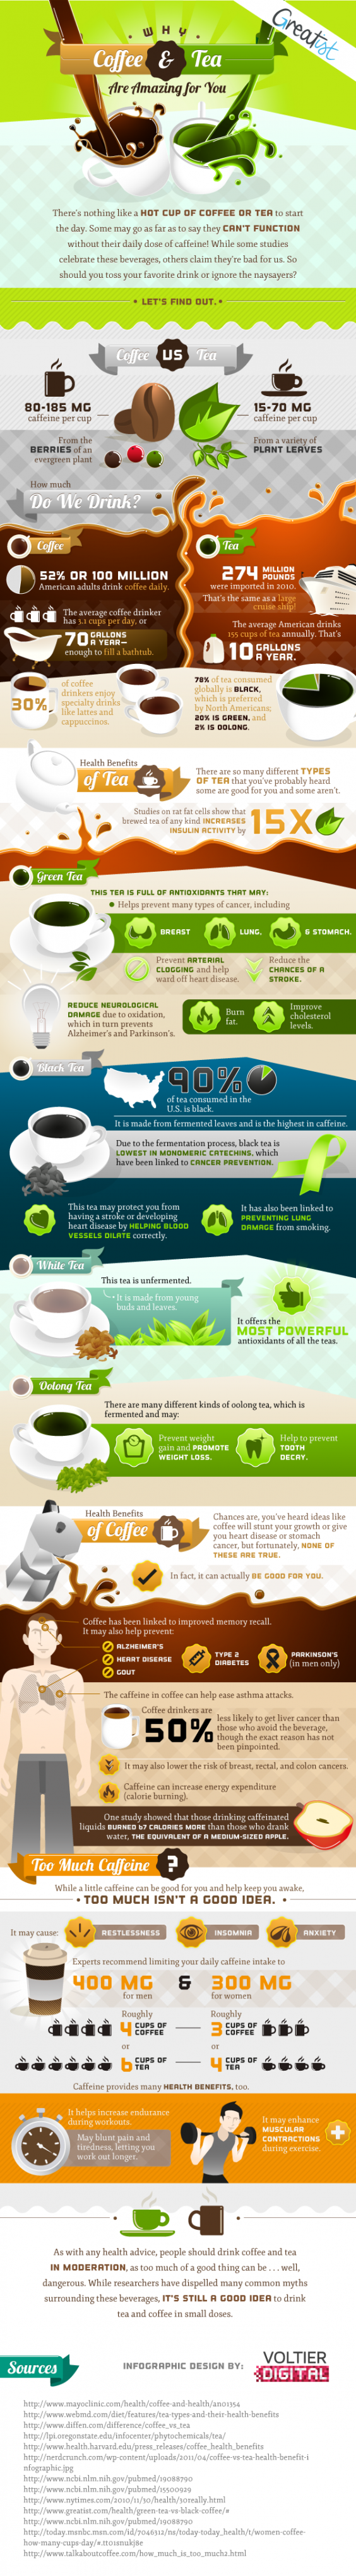 How Do You Start Your Day (The Benefits of Tea and Coffee) Infographic